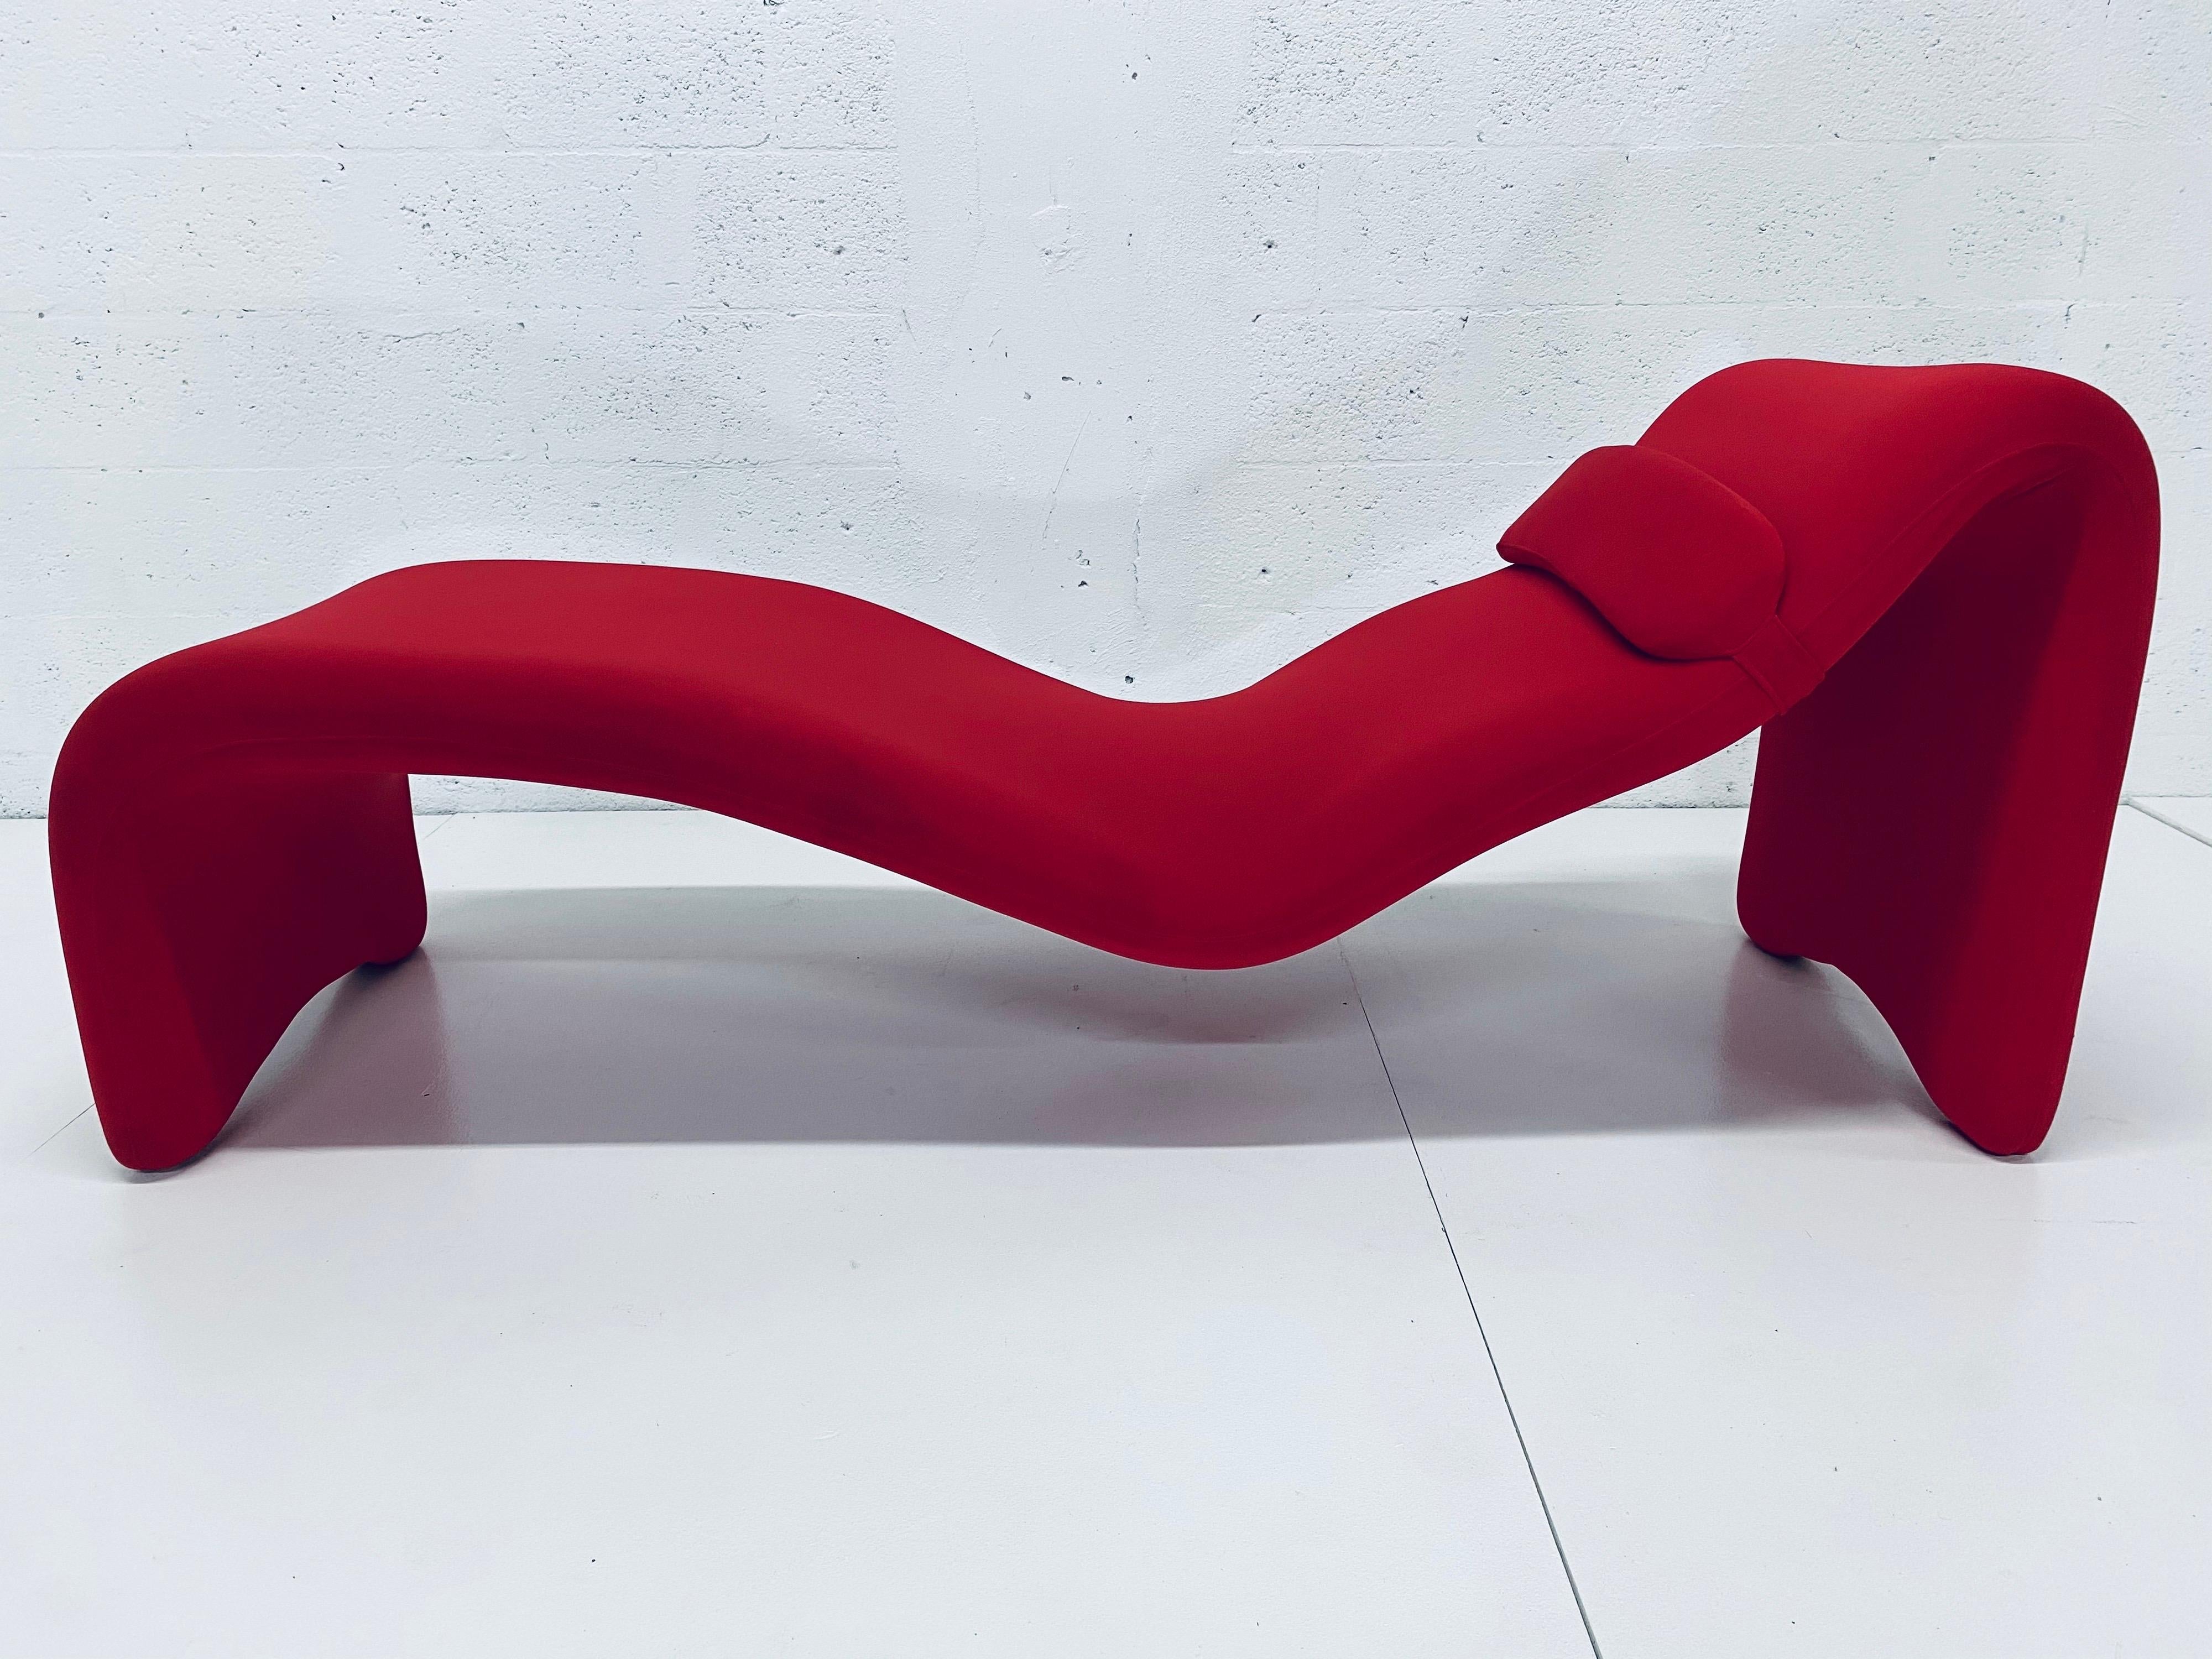 Originally designed by Olivier Mourgue for Airborne, this wave chaise lounge consists of a stretchy red jersey fabric over a foam and steel frame and was manufactured by Quebec 69, Canada. The fabric is original and shows wear, use as is or have